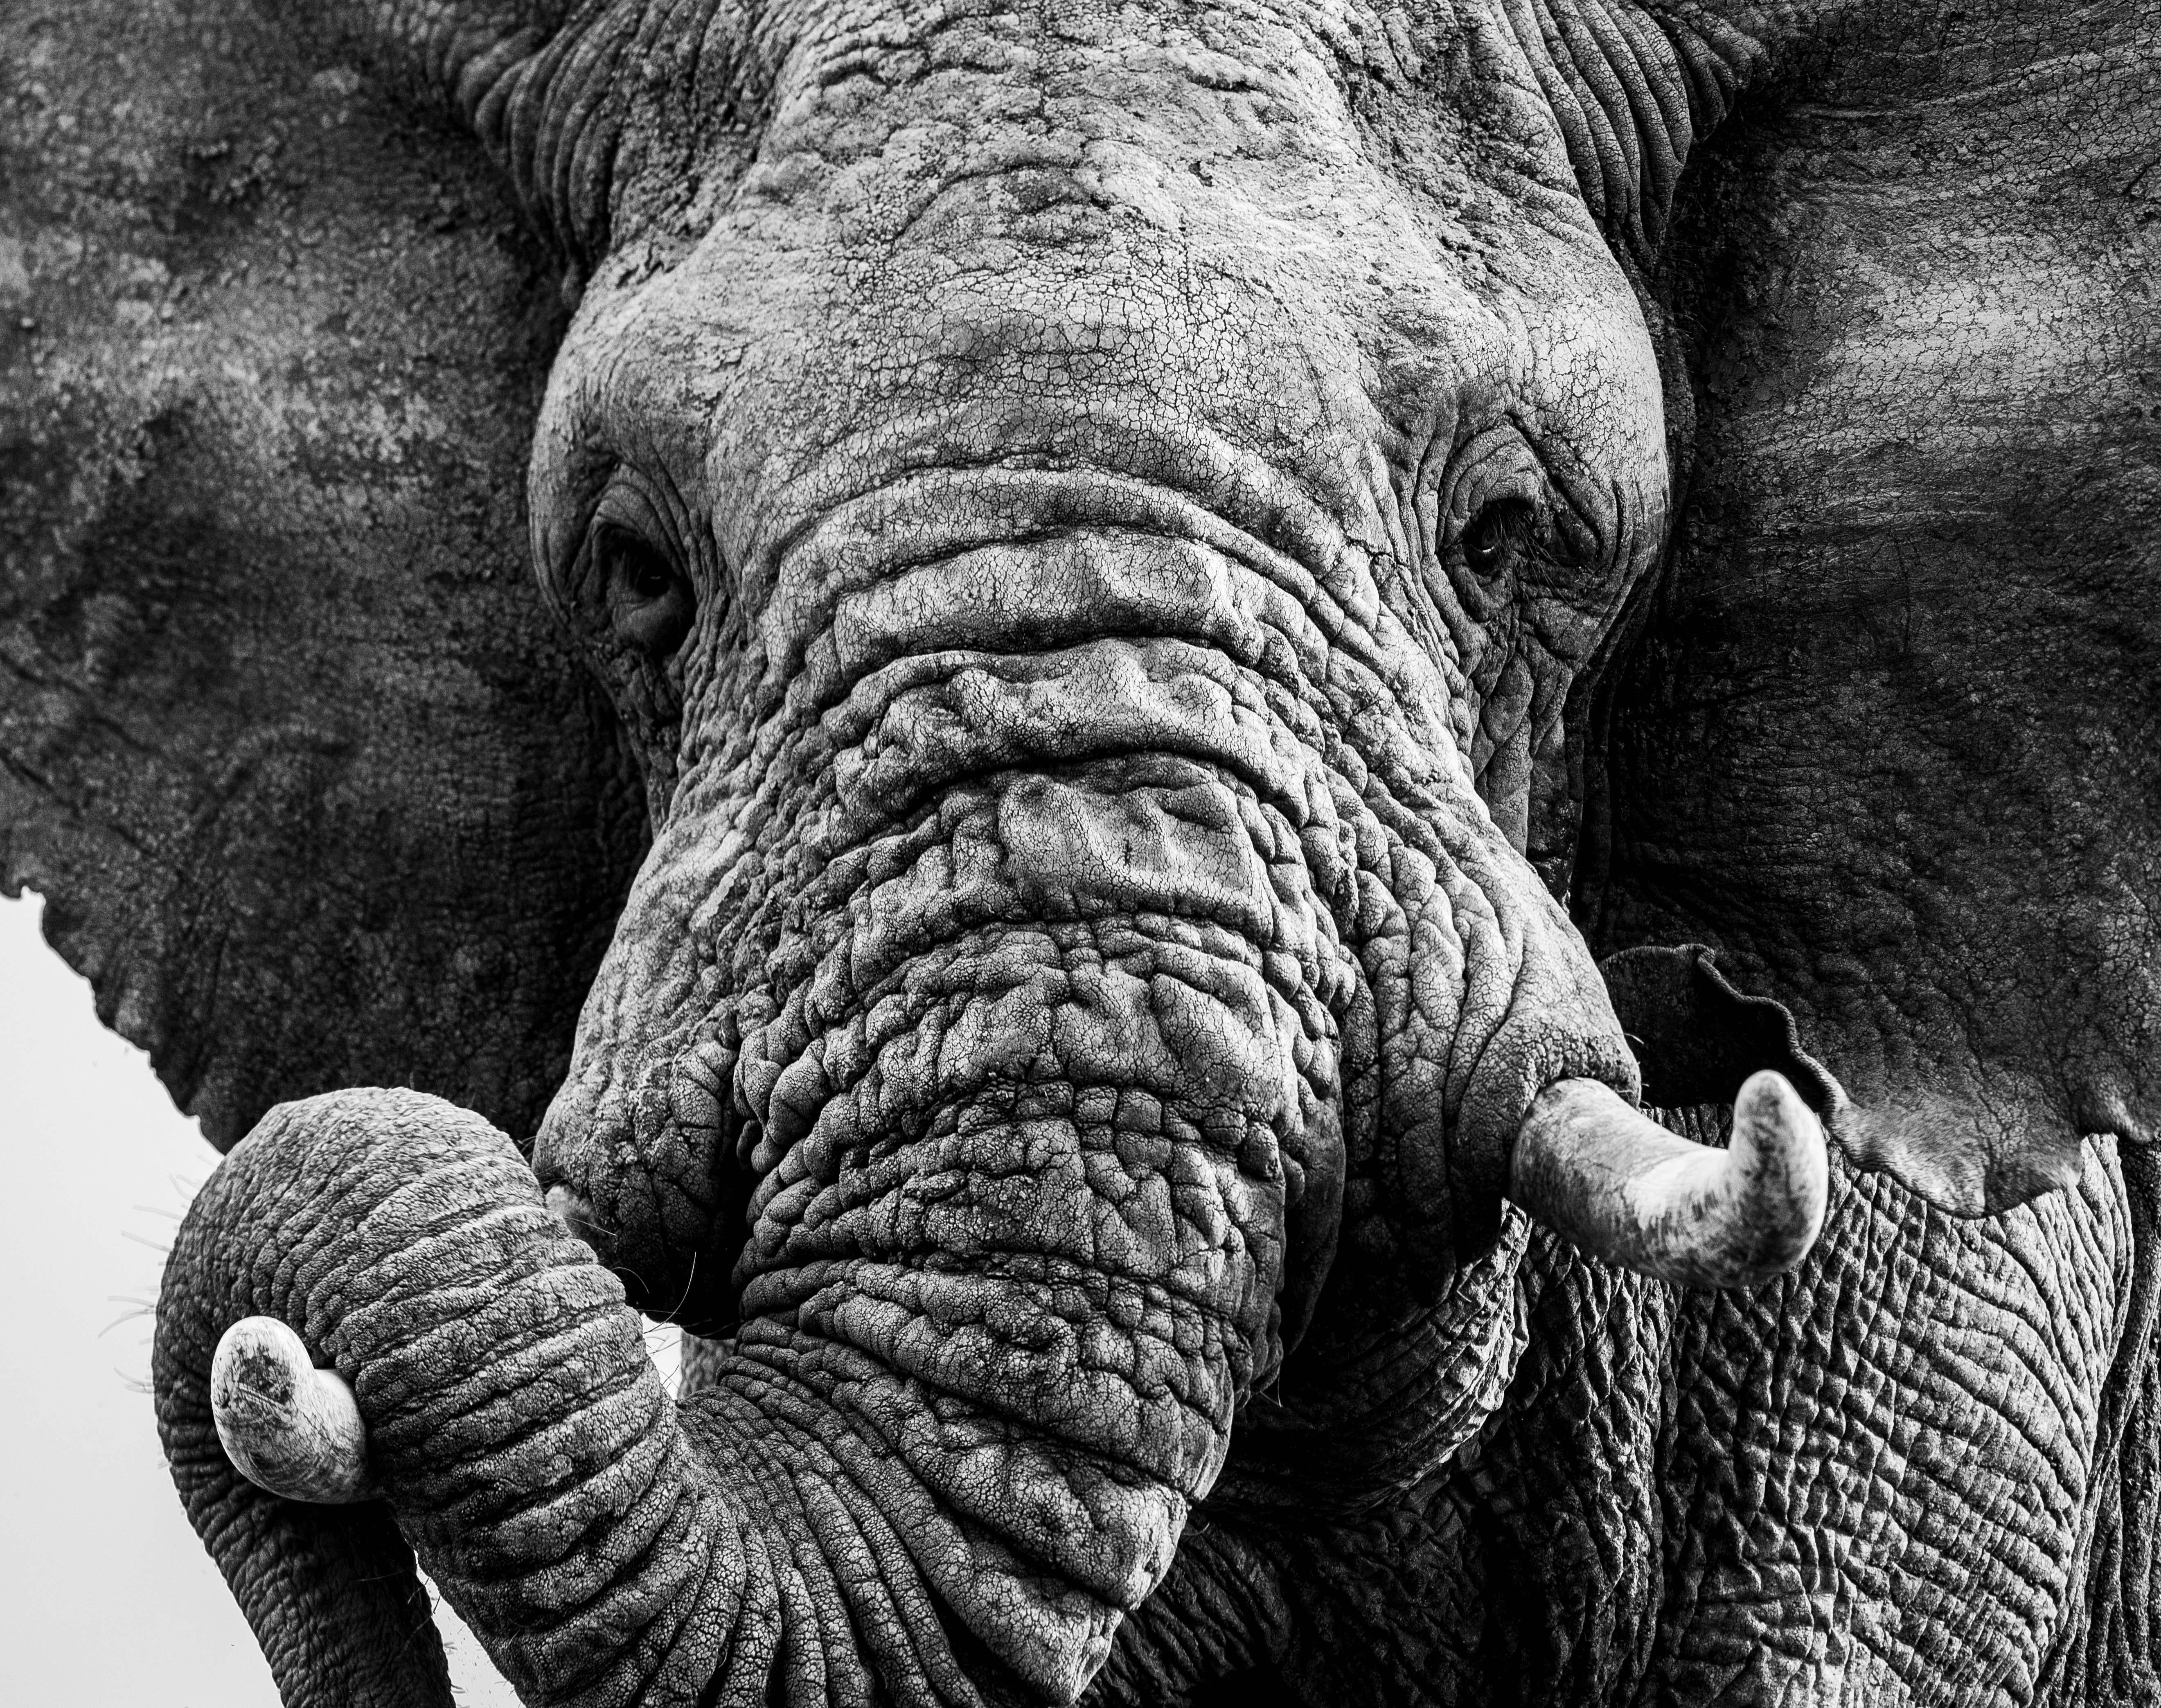 "Old bull elephants have to be the most interesting of all to photograph and with a tight portrait being all about textures, there is no question that a weathered and wrinkled individual would be the perfect subject matter.

Photographing an